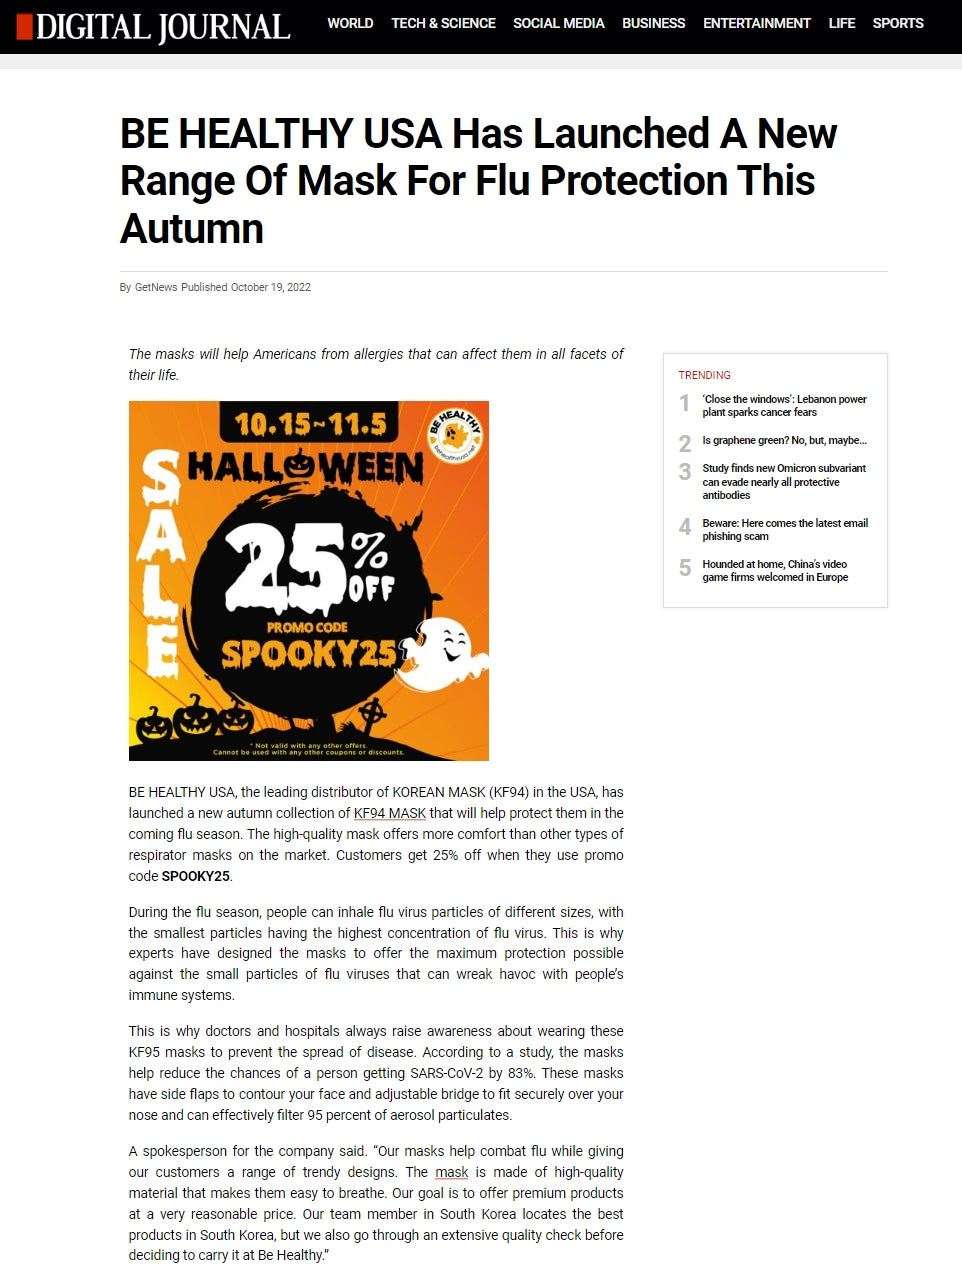 BE HEALTHY USA Has Launched A New Range Of Mask For Flu Protection This Autumn